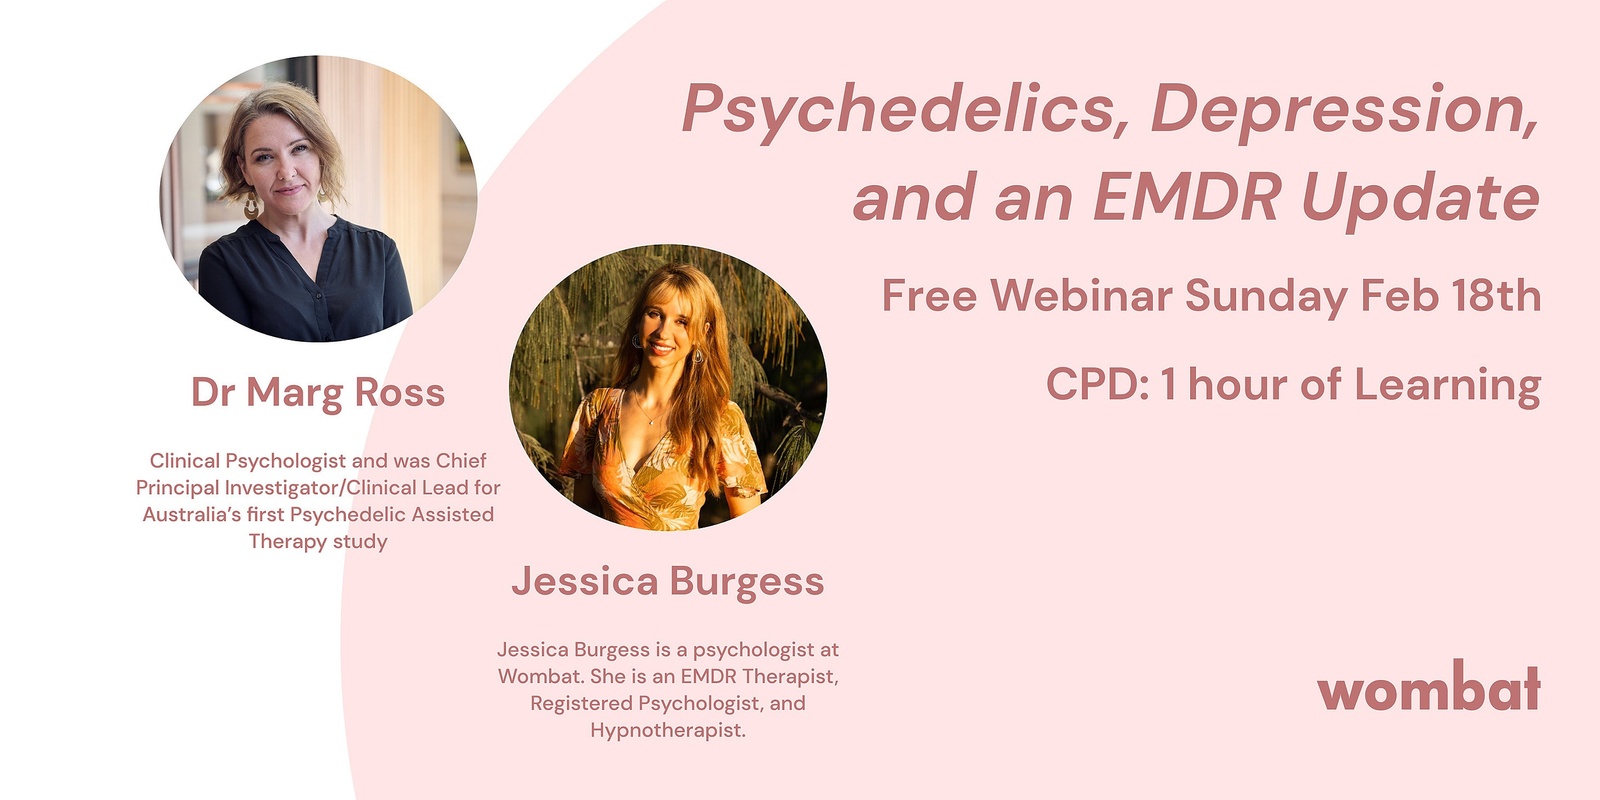 Banner image for FREE WEBINAR: Psychedelics, Depression, and an EMDR Update (CPD: 1 hour) - Guest speakers Dr Marg Ross and Jessica Burgess